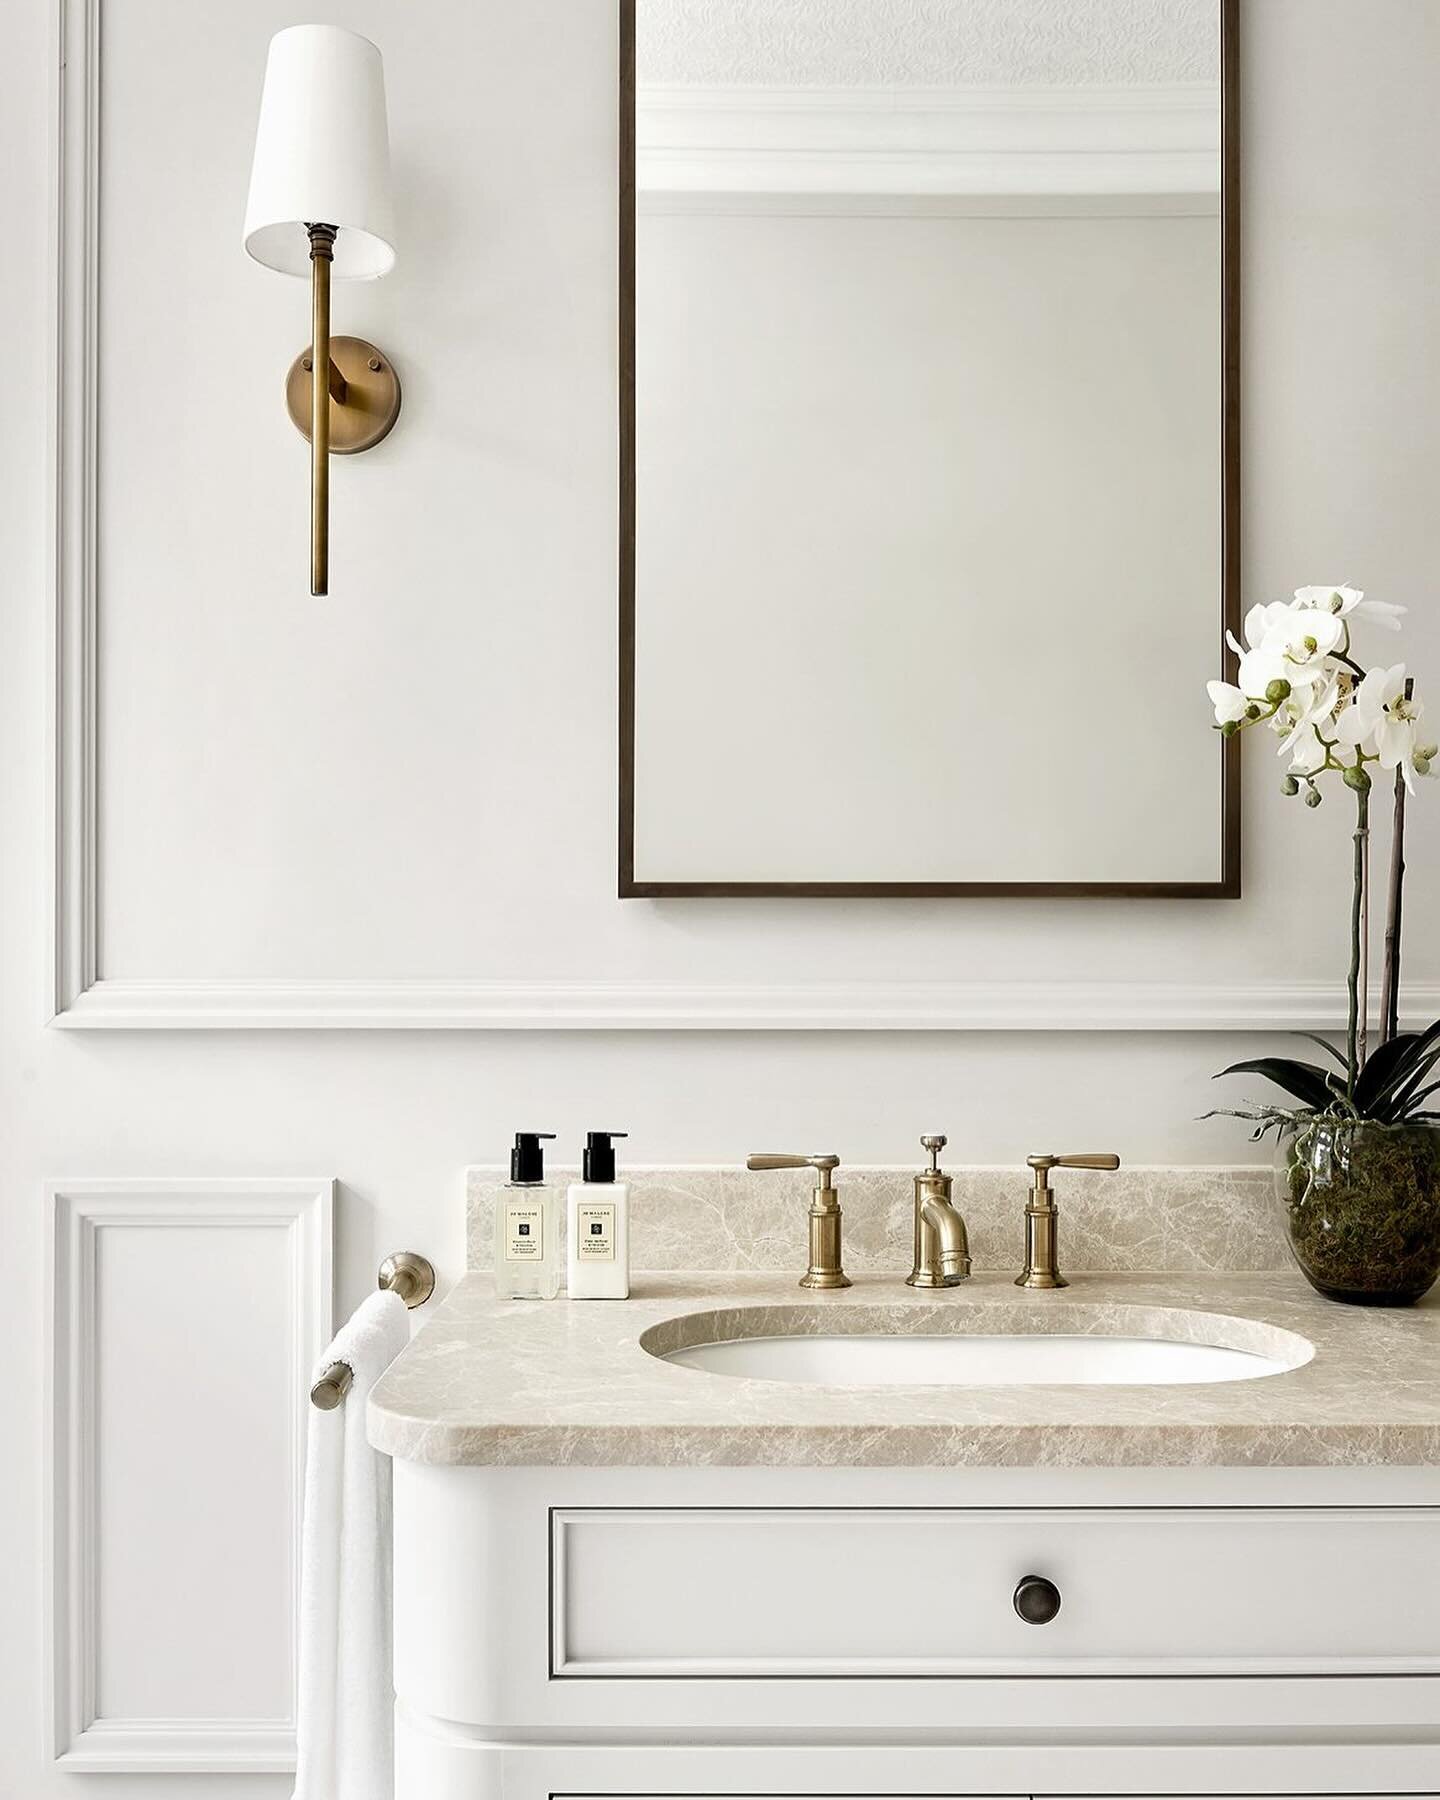 B E A U T Y  I N  S T I L L N E S S 

Introducing a little preview of our recent bathroom shoot in Derbyshire. 

In a delicate balance of simplicity and refinement, each carefully chosen element contributes to a sense of tranquility, from the elegant